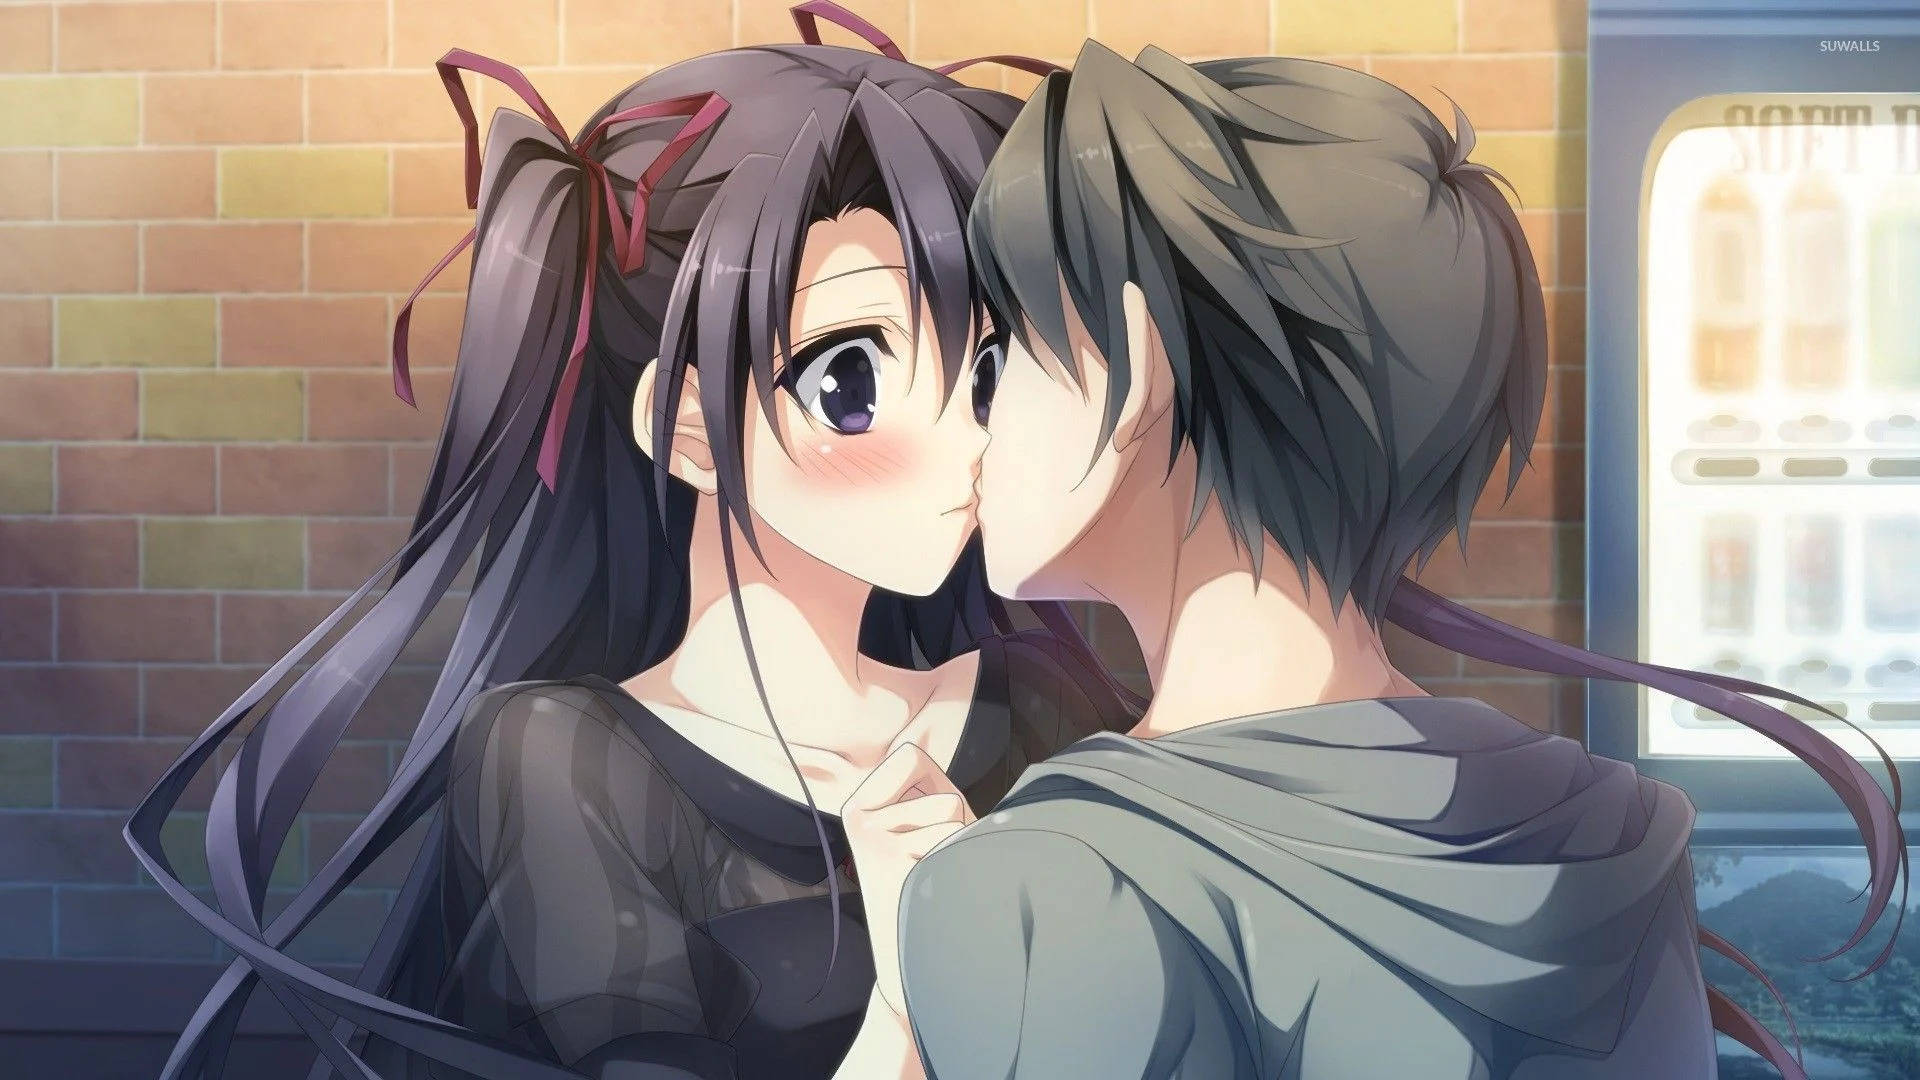 Download Cute Anime Couple Kiss Against Brick Wall Wallpaper | Wallpapers .com